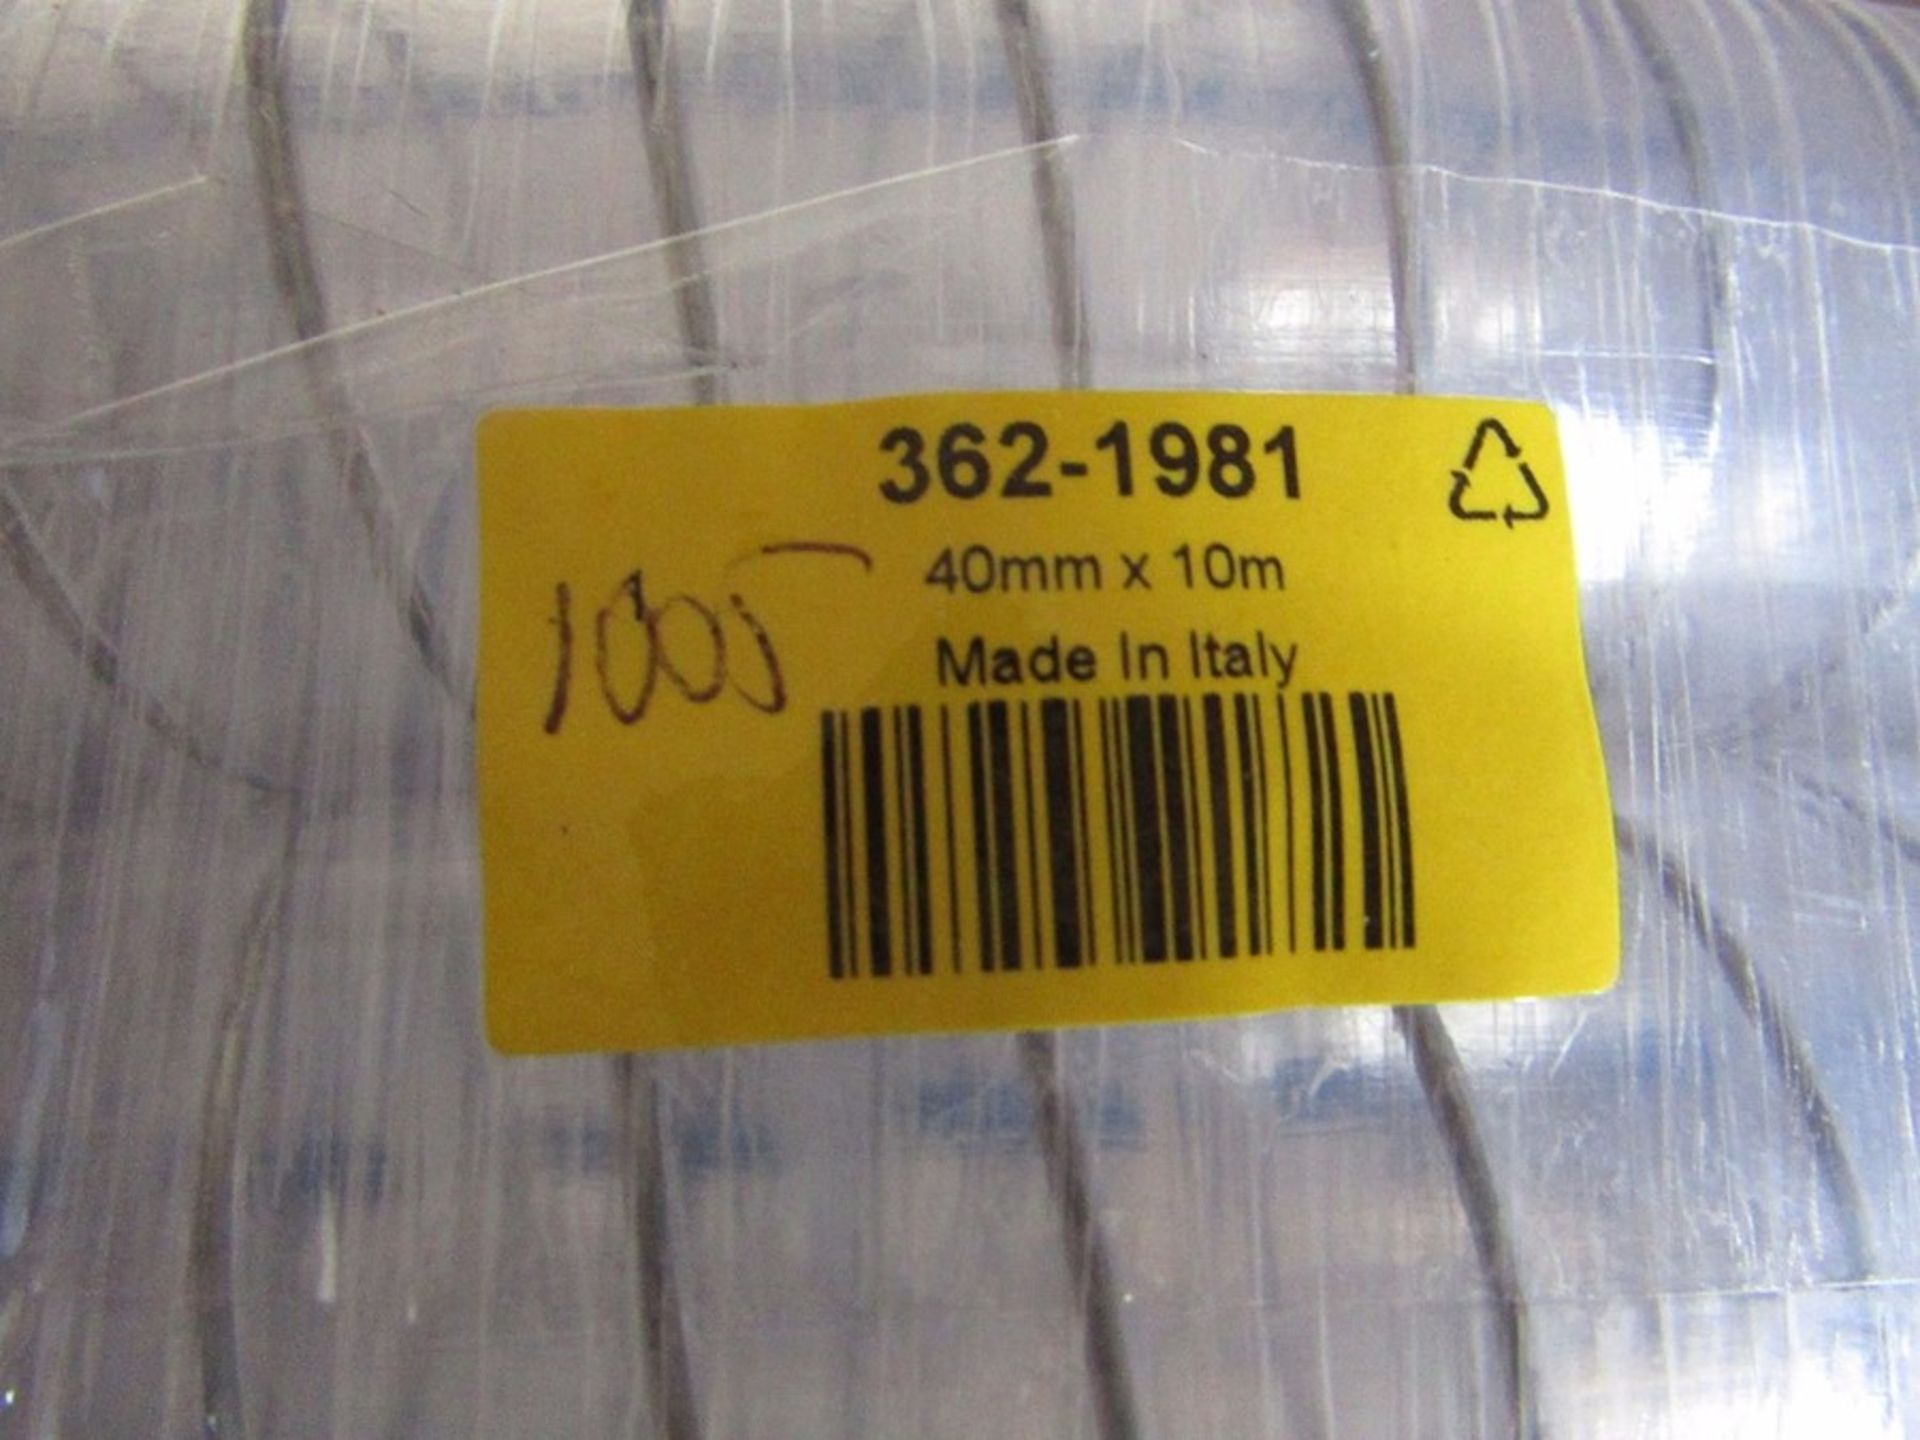 10m Long Clear PVC Ducting Reinforced Tubing, 49.4mm od / 40mm id -1005 3621981 - Image 2 of 2